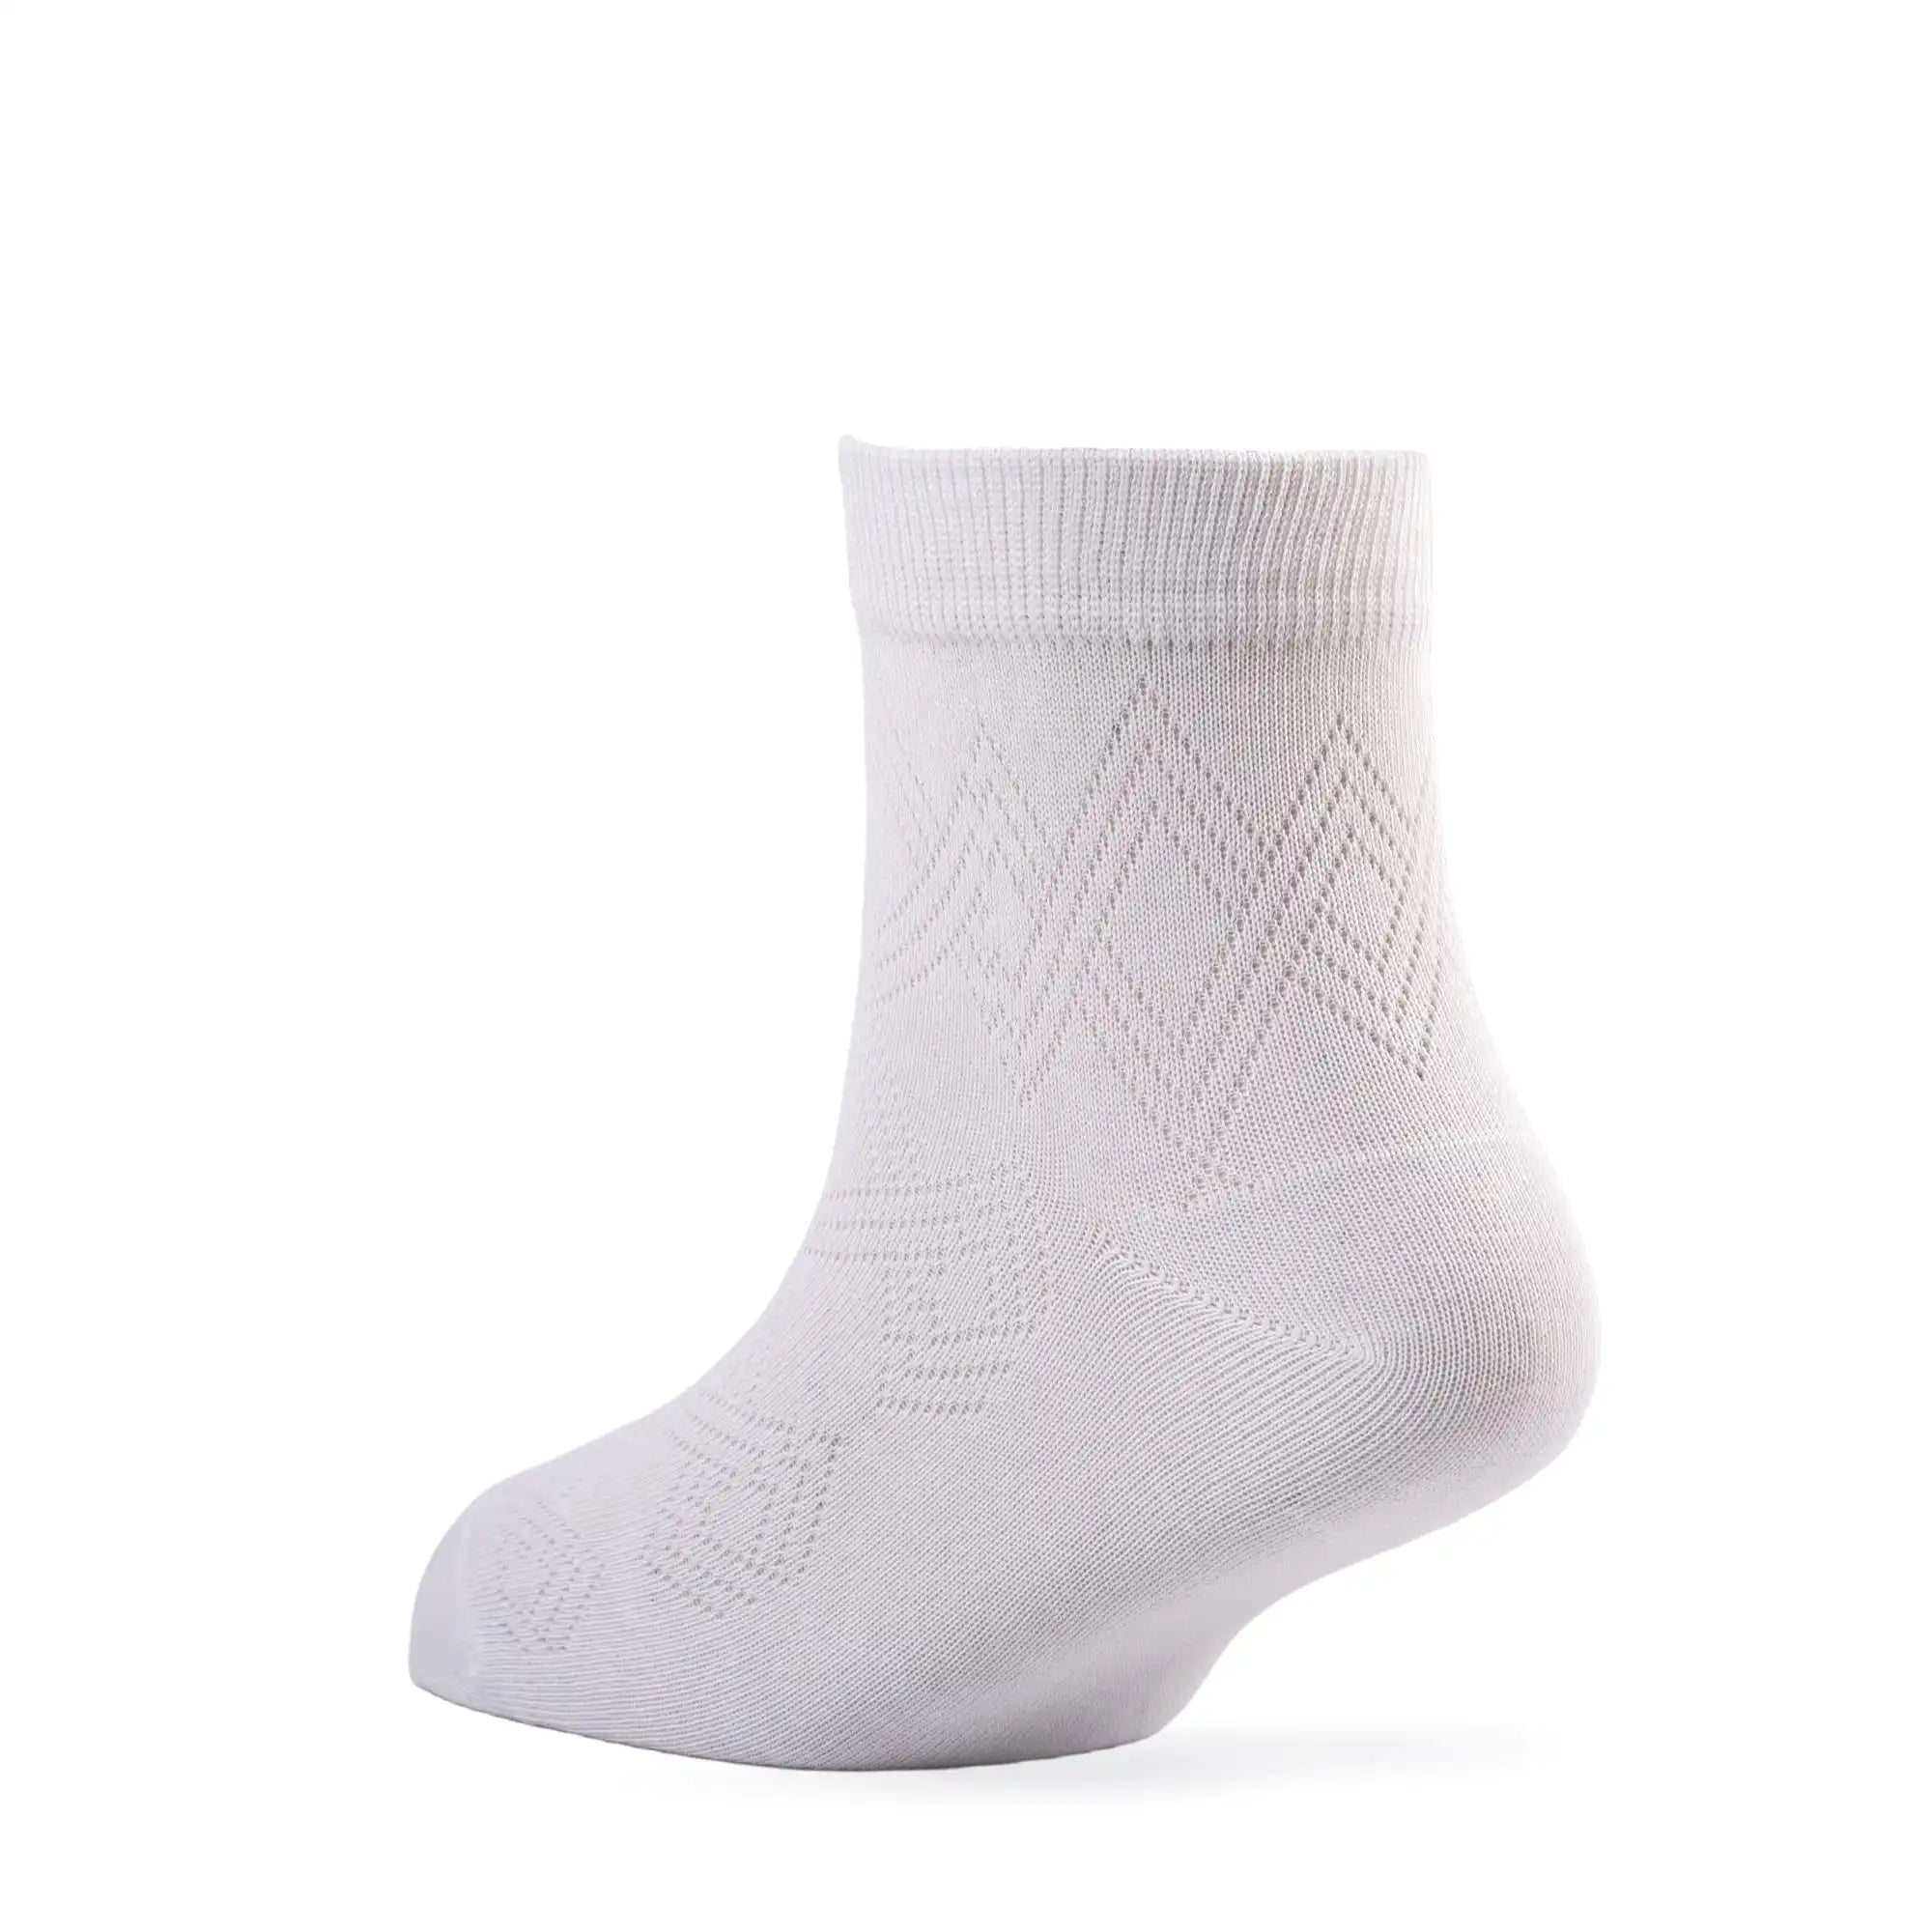 Young Wings Men's White Colour Cotton Fabric Solid Ankle Length Socks - Pack of 5, Style no. 2304-M1